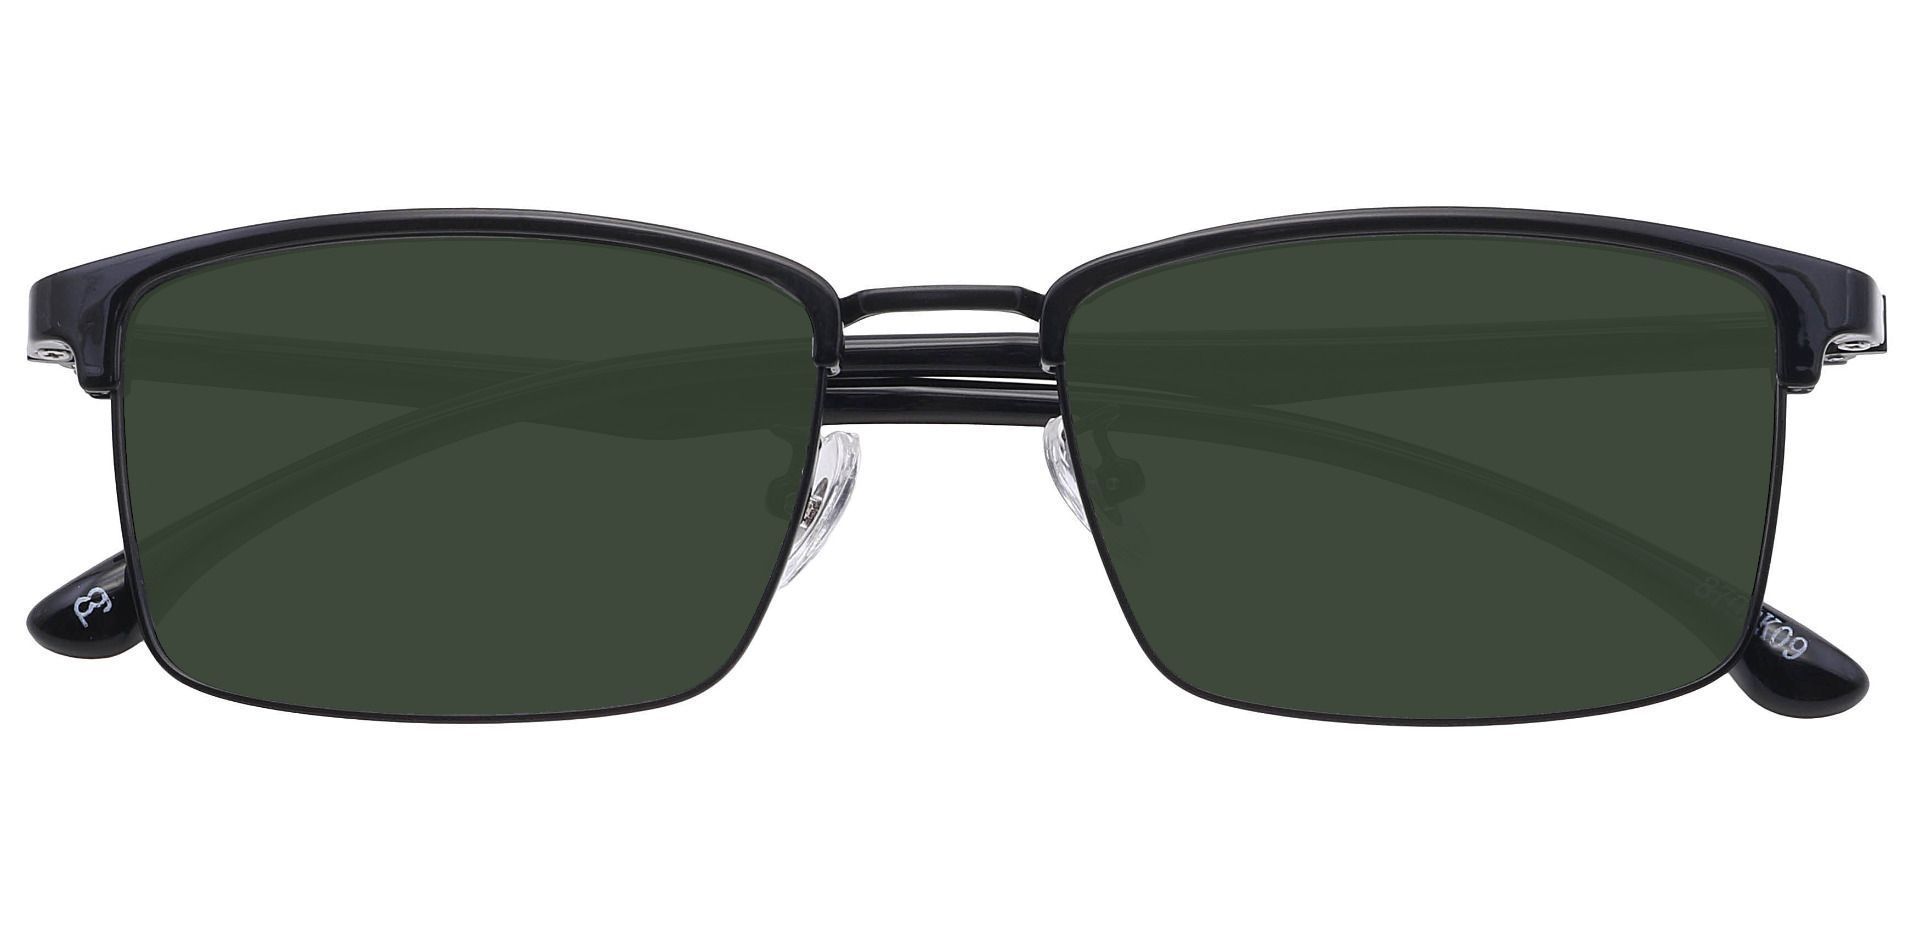 Young Browline Prescription Sunglasses - Black Frame With Green Lenses